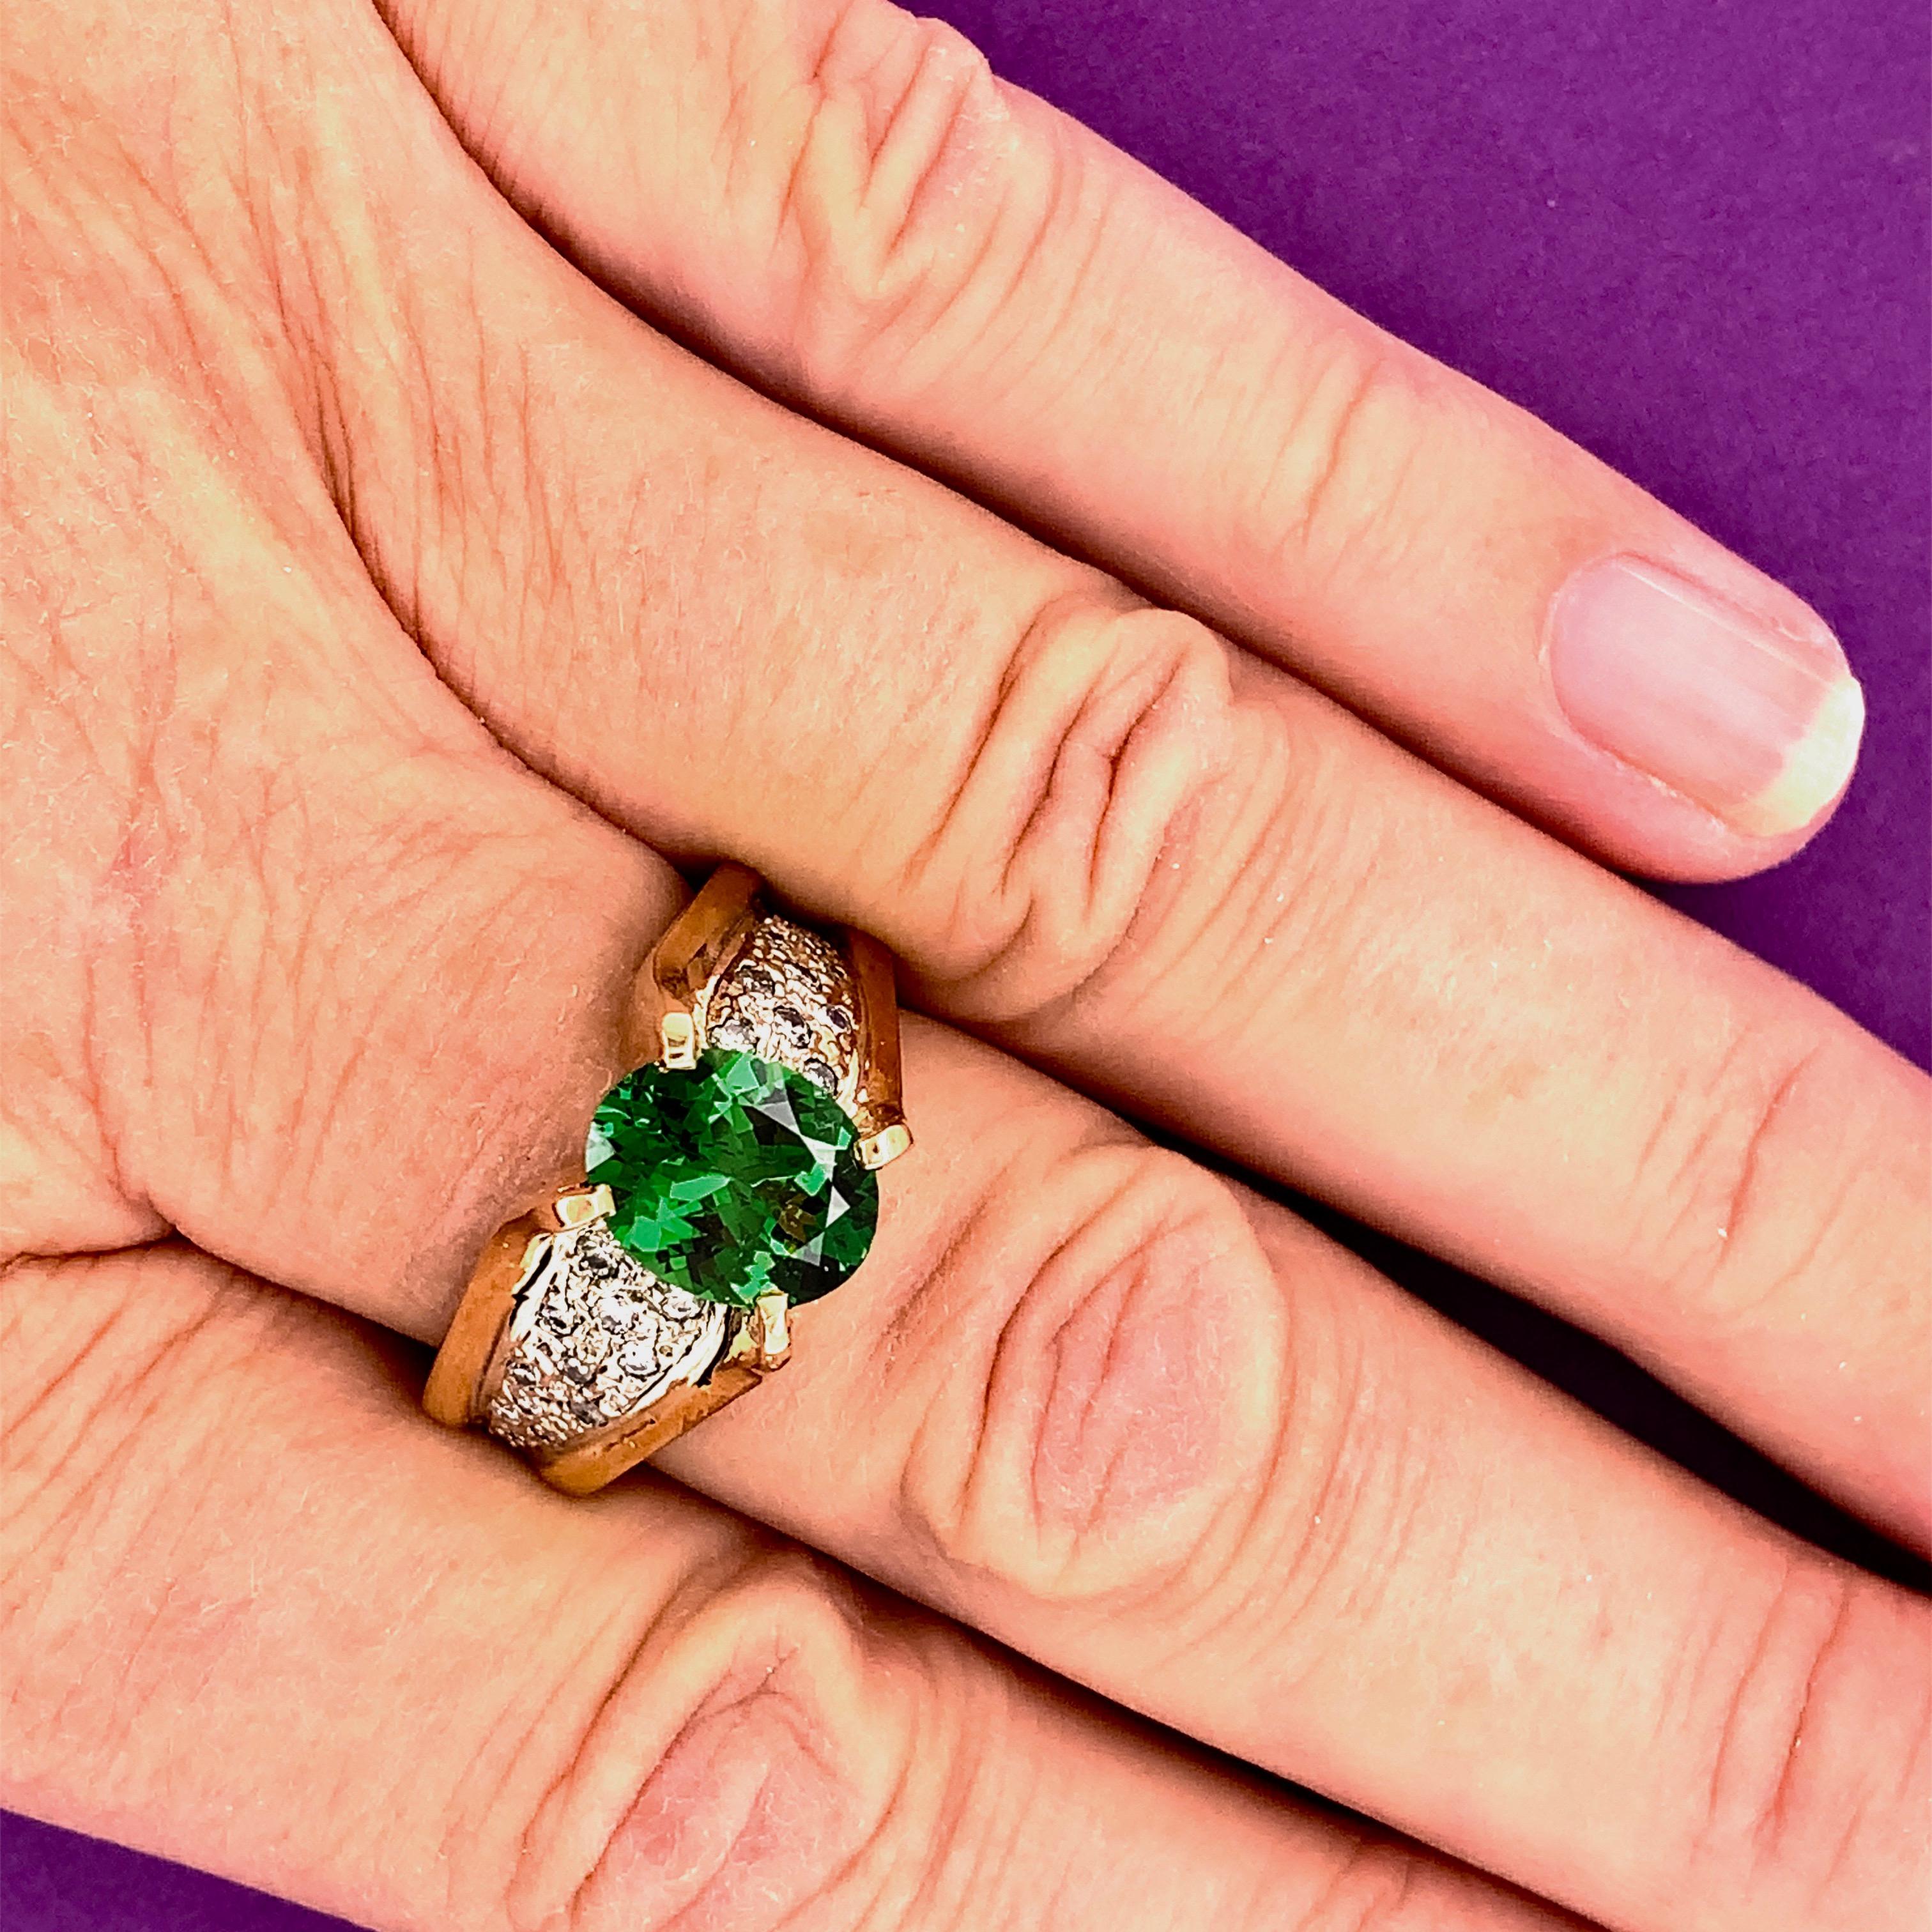  Green Garnets are a rather new discover. We set this nice VS grade Tsavorite Garnet from Tanzania in a 14-karat two tone gold ring, accented with 24 small round diamonds sprinkled in white gold pave style around the center stone.  They are SI